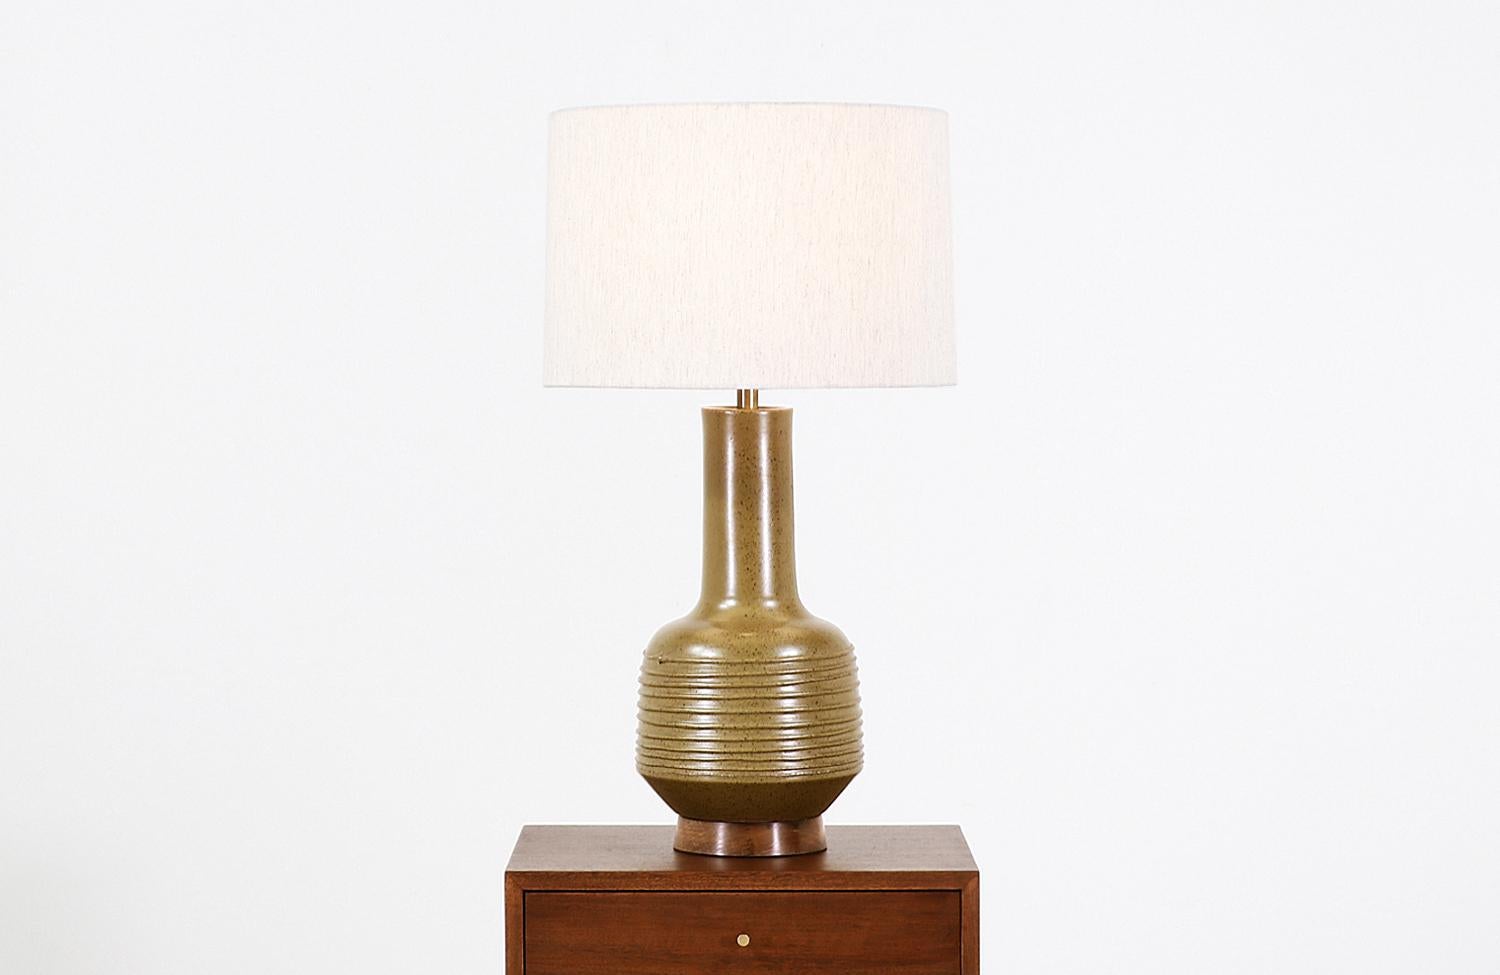 Similar lampshade included

Ceramic table lamp designed by David Cressey for Architectural Pottery in California in the 1970s. This elegant midcentury table lamp with brown speckles against its olive green ceramic body features a horizontal string